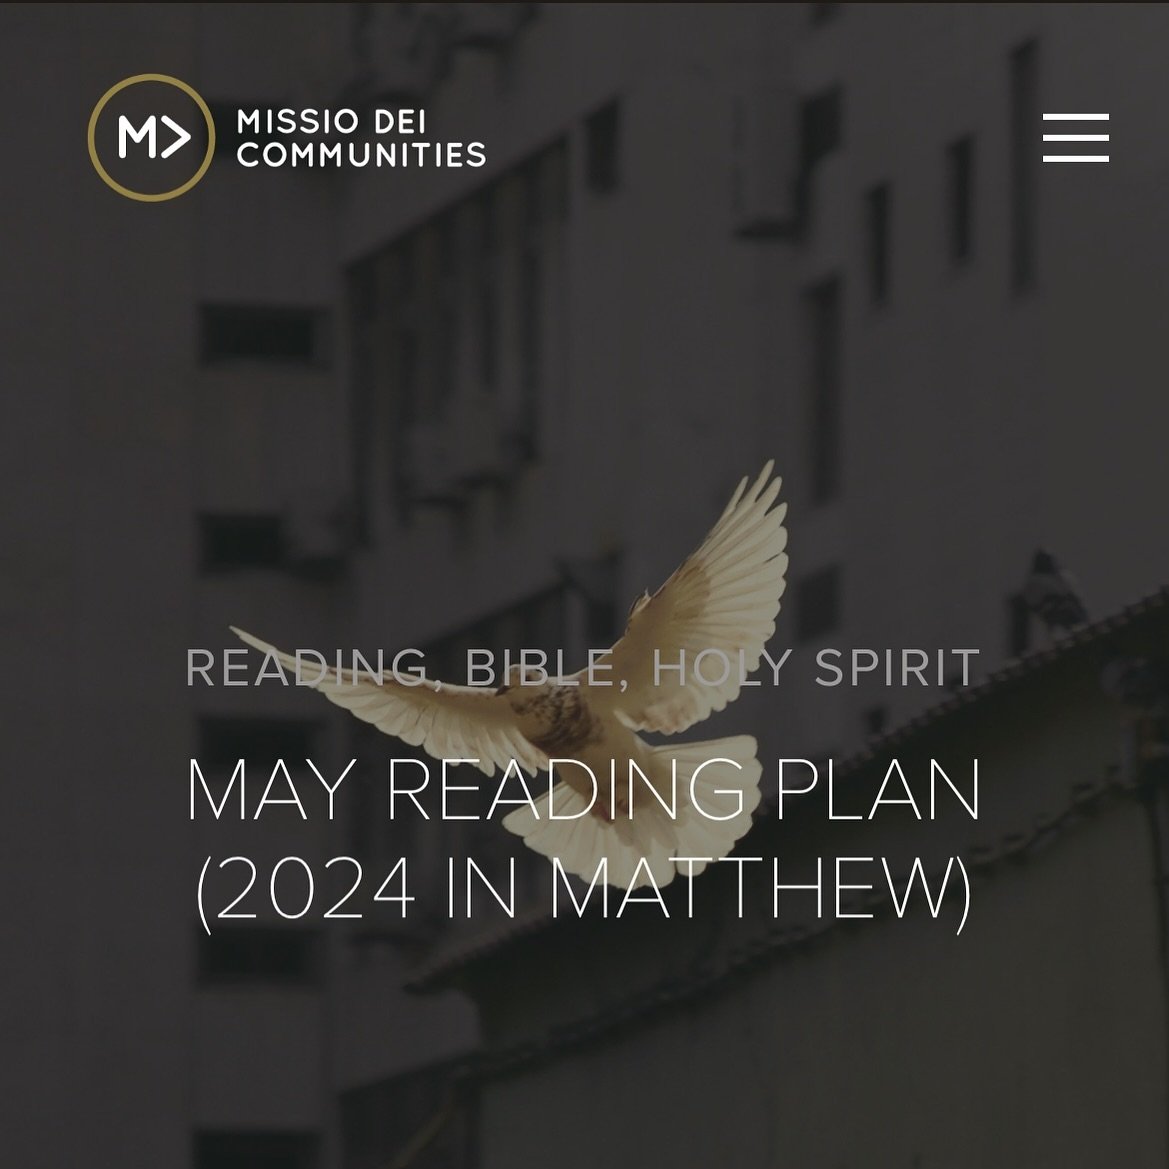 COMMENT FOR LINK!
&mdash;
Our Bible Reading Plan for the month of May is online now. This month we examine the work of the Holy Spirit within the book of Matthew, as we also reflect on his work in us today.
&mdash;
#missiophx #missiodei #truestory #h